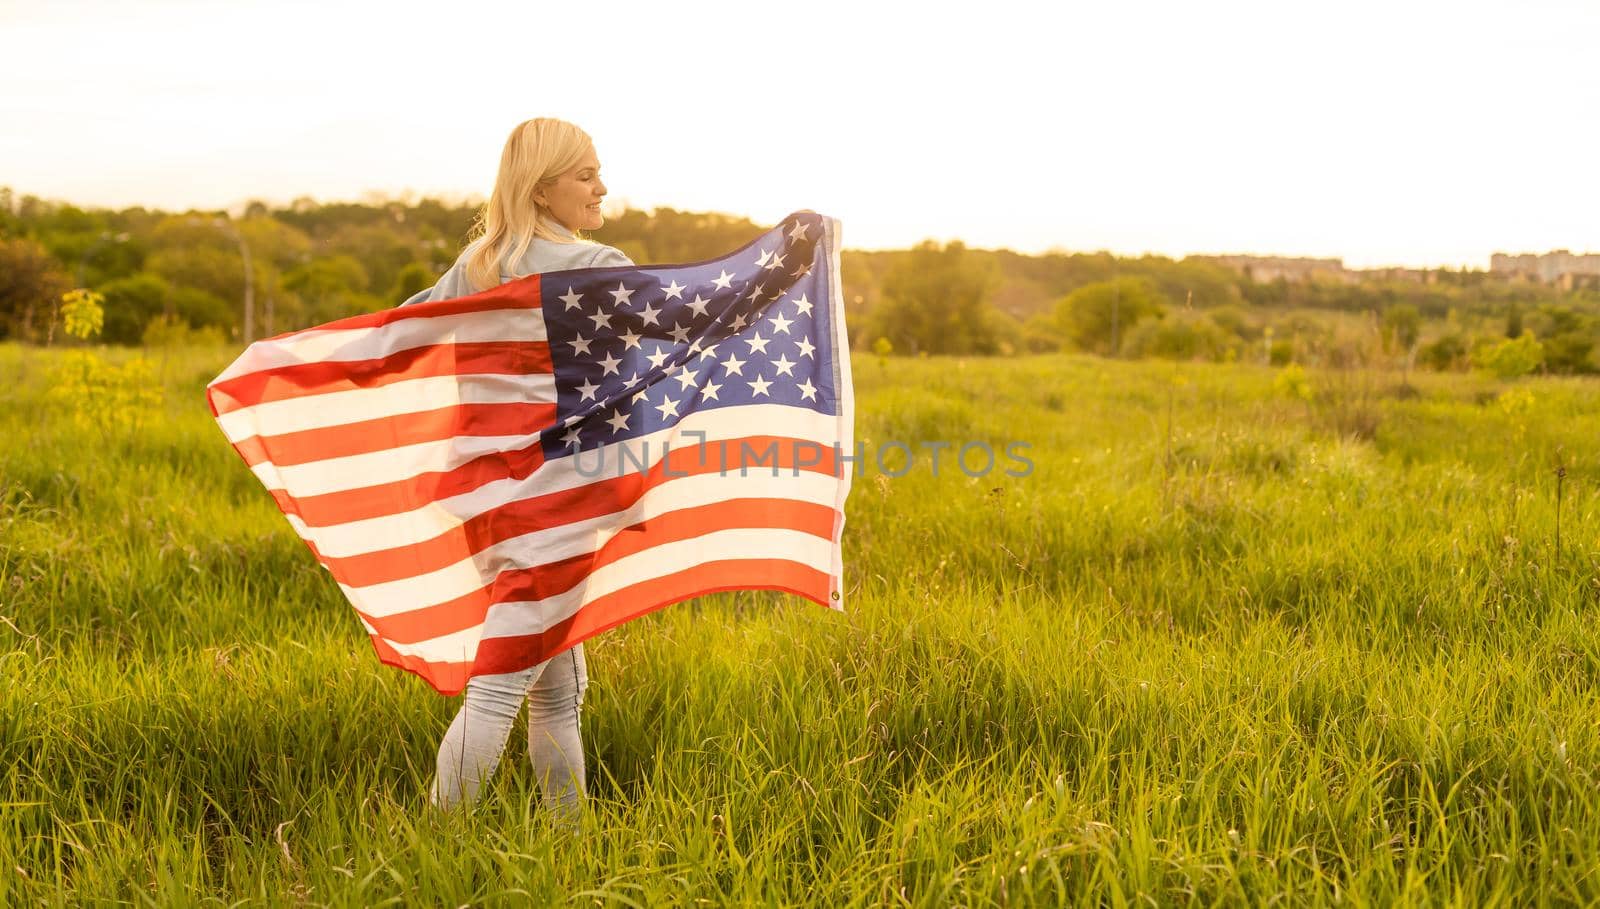 attractive woman holding an American flag in the wind in a field. Summer landscape against the blue sky. Horizontal orientation